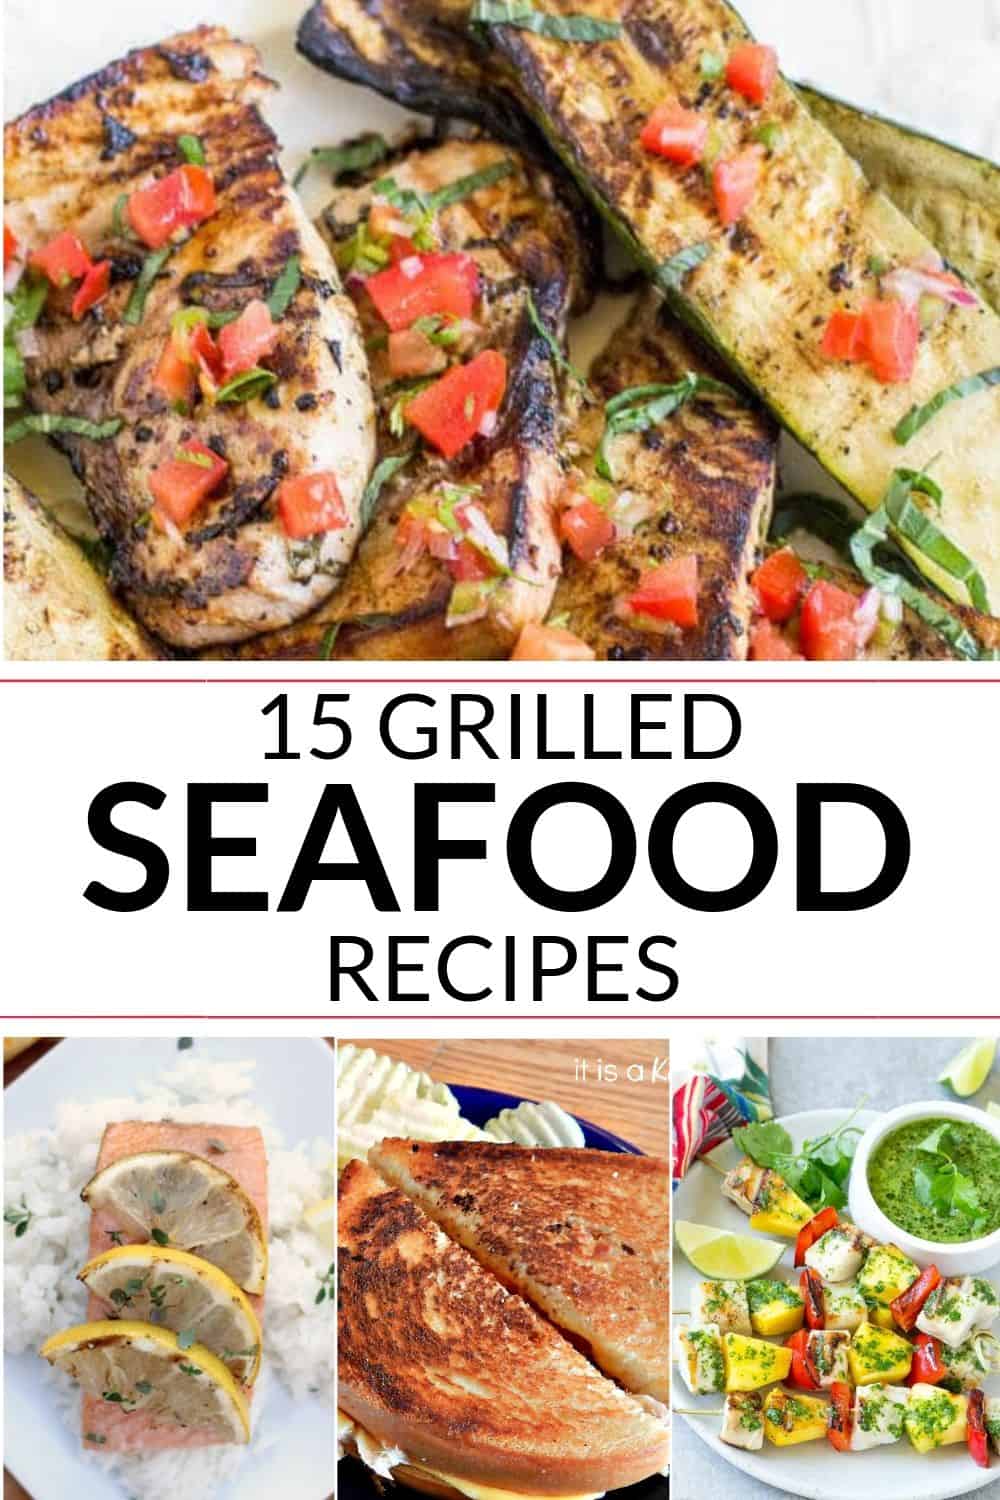 Try out these grilled seafood recipes!